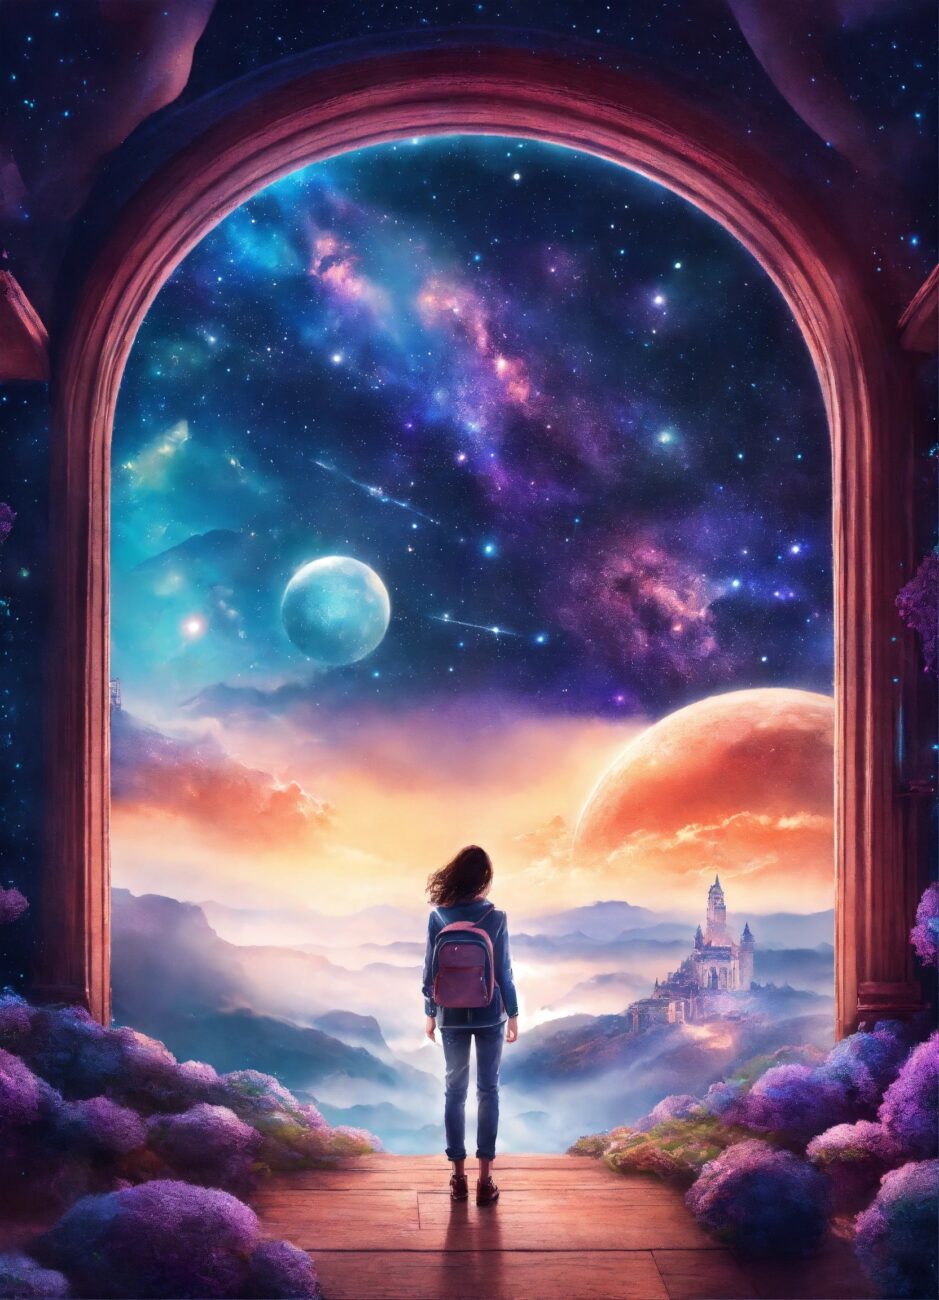 galaxy dream world with a person standing looking